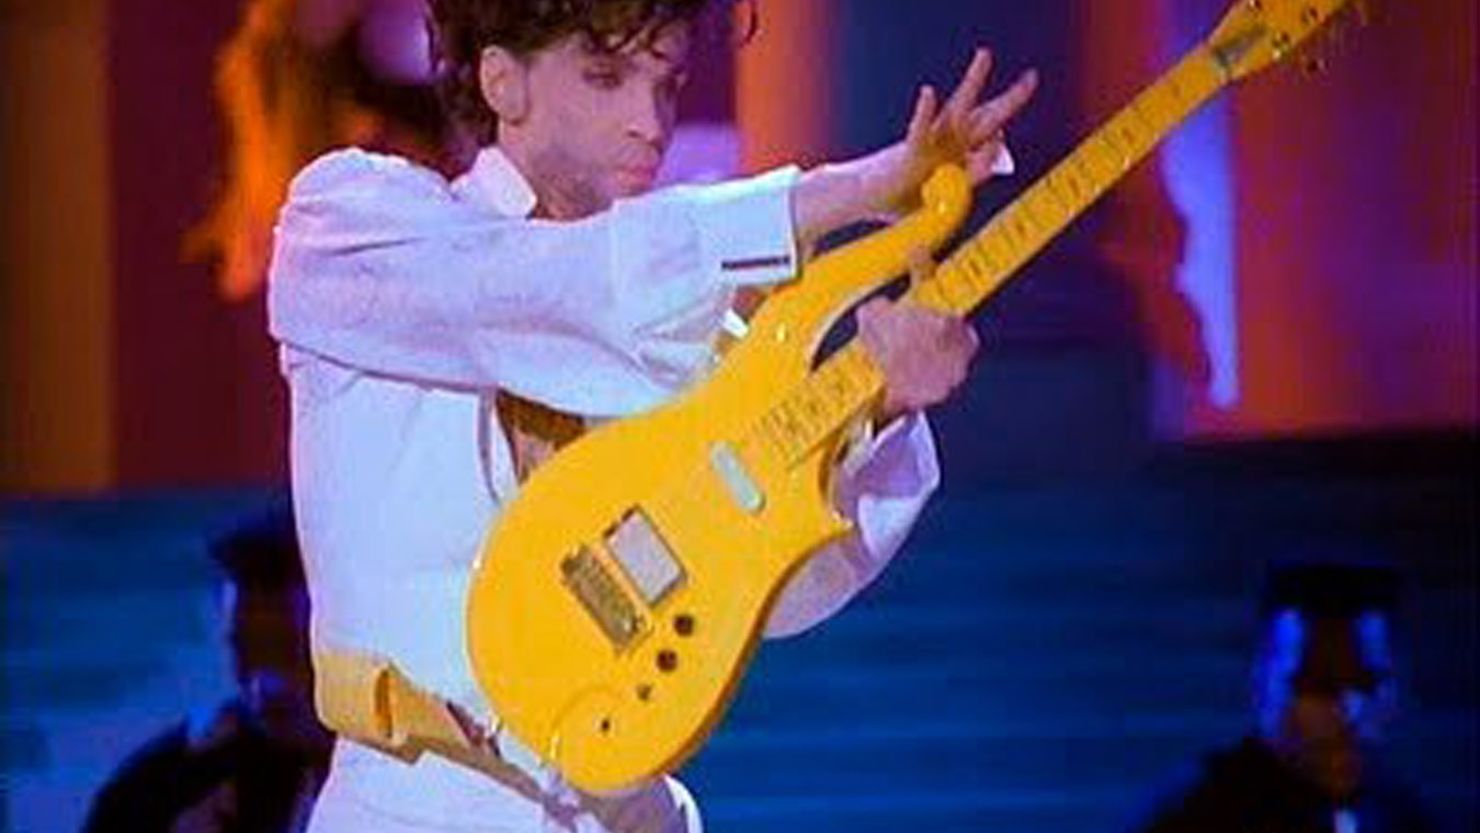 Prince used his "Yellow Cloud" electric guitar in concerts until the mid-1990's. 